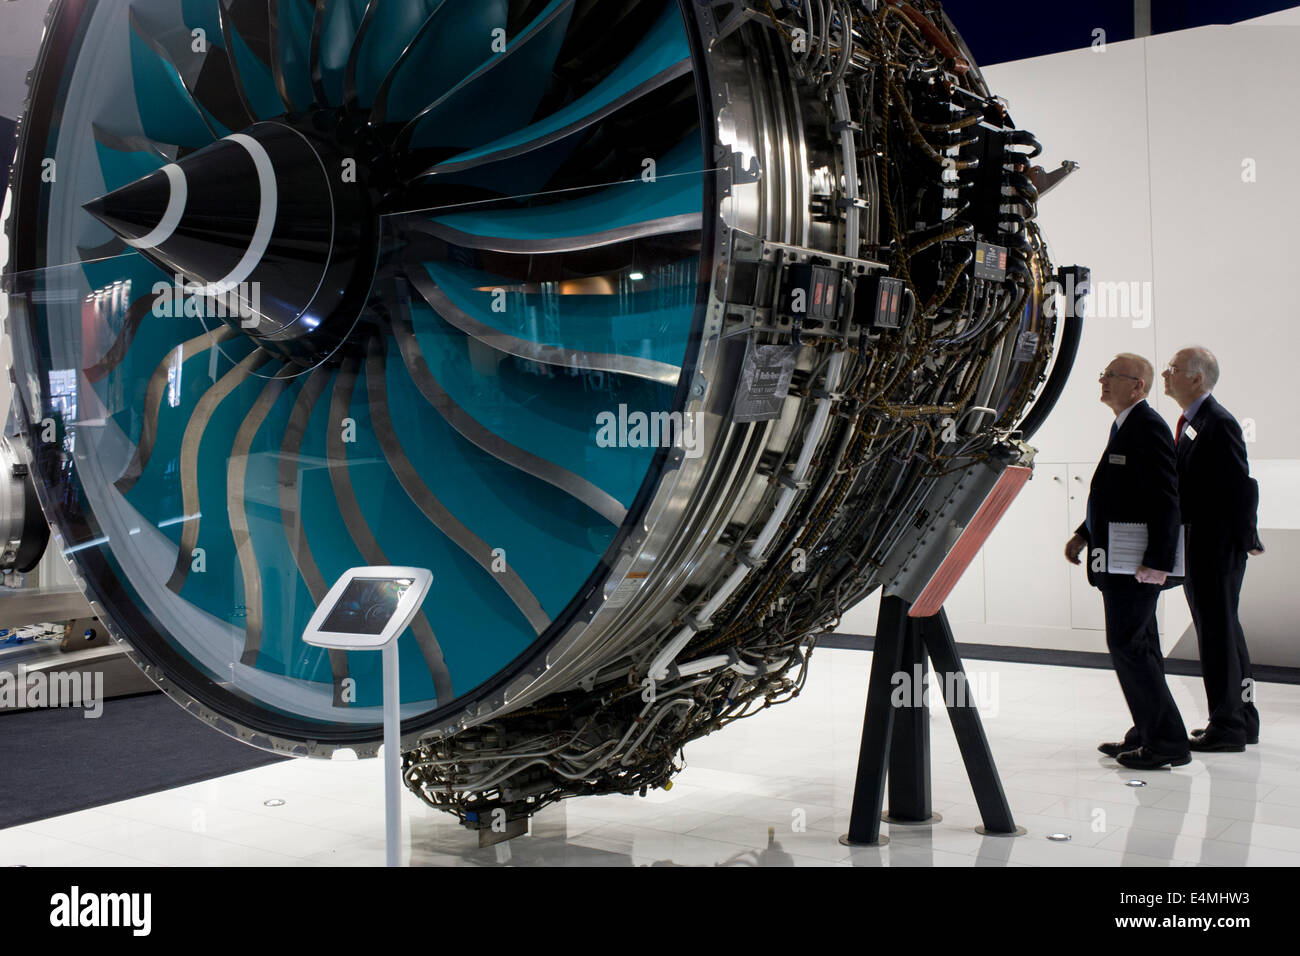 A full-size Trent jet engine is admired by delegates visiting British Rolls-Royce manufacturer's exhibition stand at the Farnborough Air Show, England. Rolls-Royce Trent is the name given to a family of three-spool, high bypass turbofan aircraft engines manufactured by Rolls-Royce plc. The engine is named after the River Trent in the Midlands of England. The civil aerospace business is a major manufacturer of aero engines for all sectors of the airliner and corporate jet market. Rolls-Royce powers more than 30 types of commercial aircraft and has almost 13,000 engines in service around  world. Stock Photo